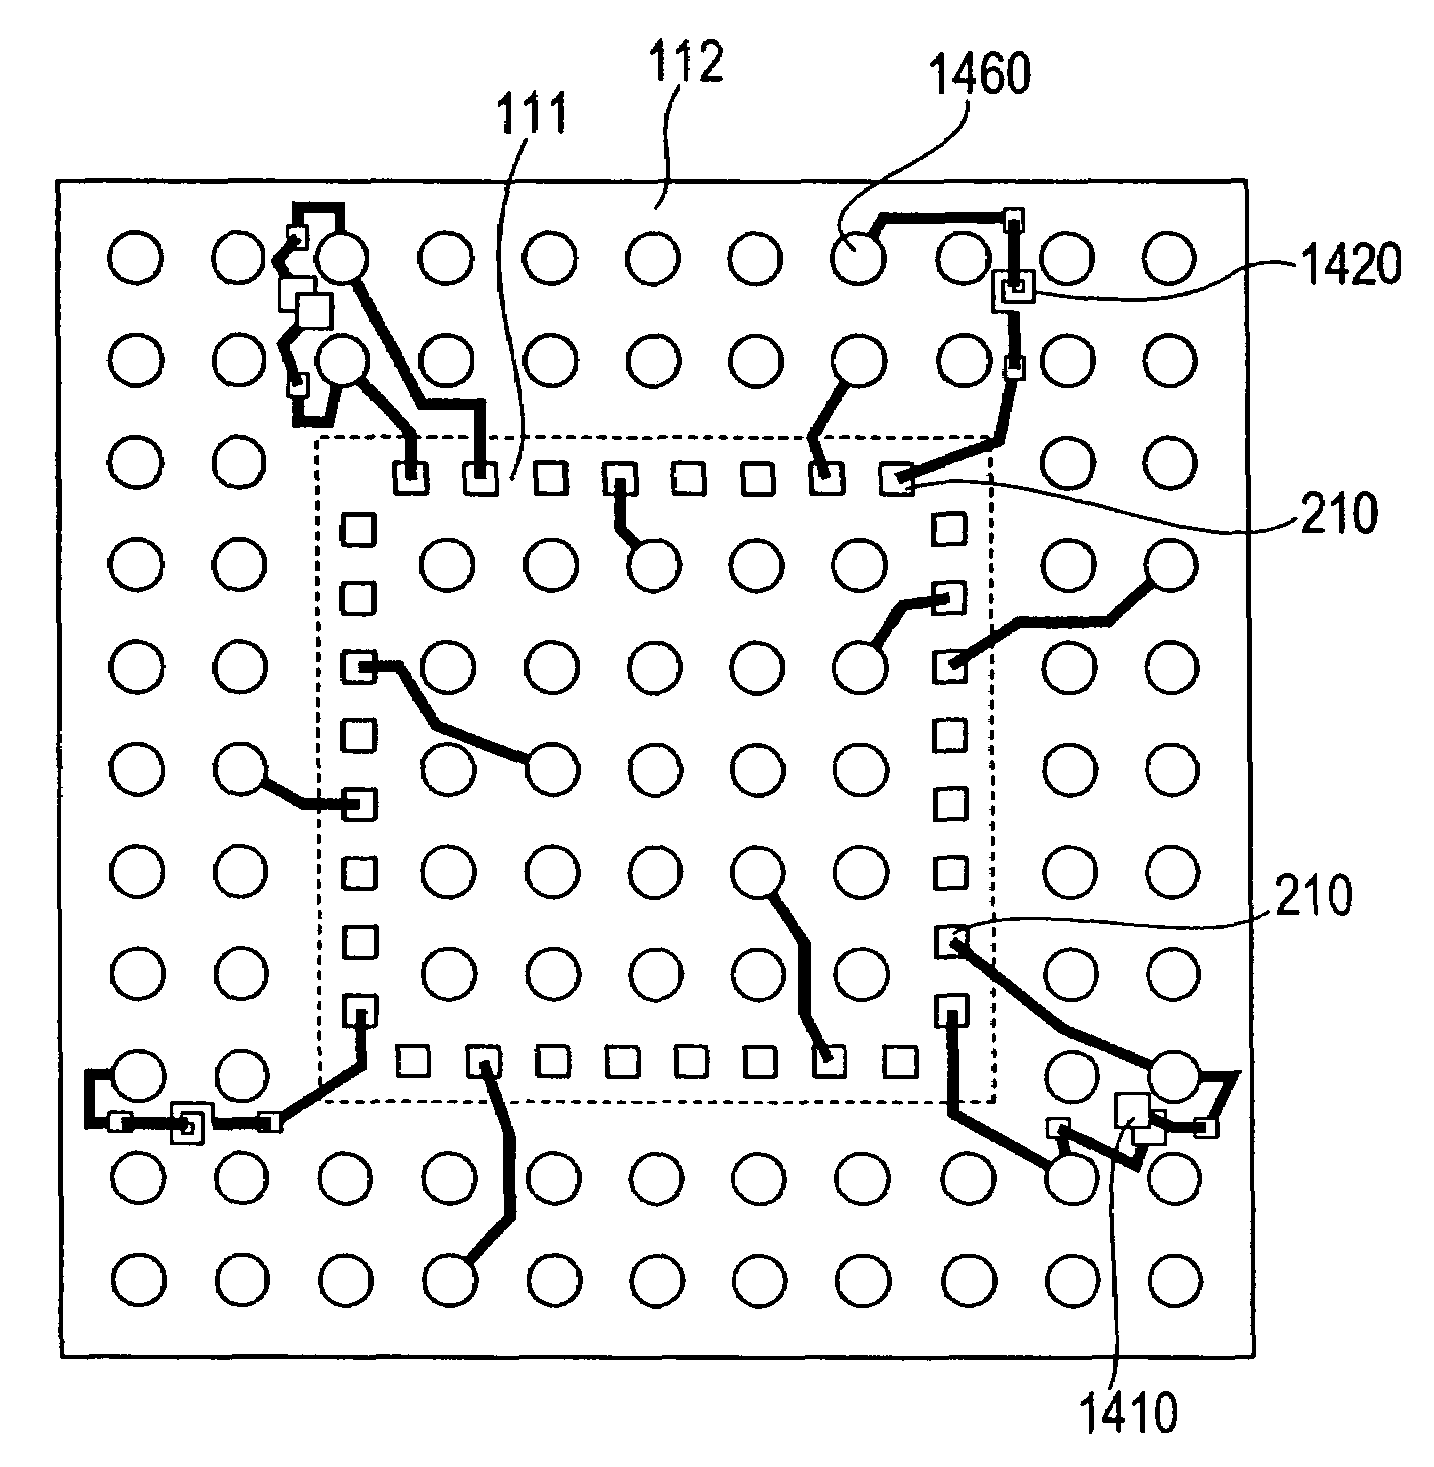 Semiconductor chip with passive element in a wiring region of the chip